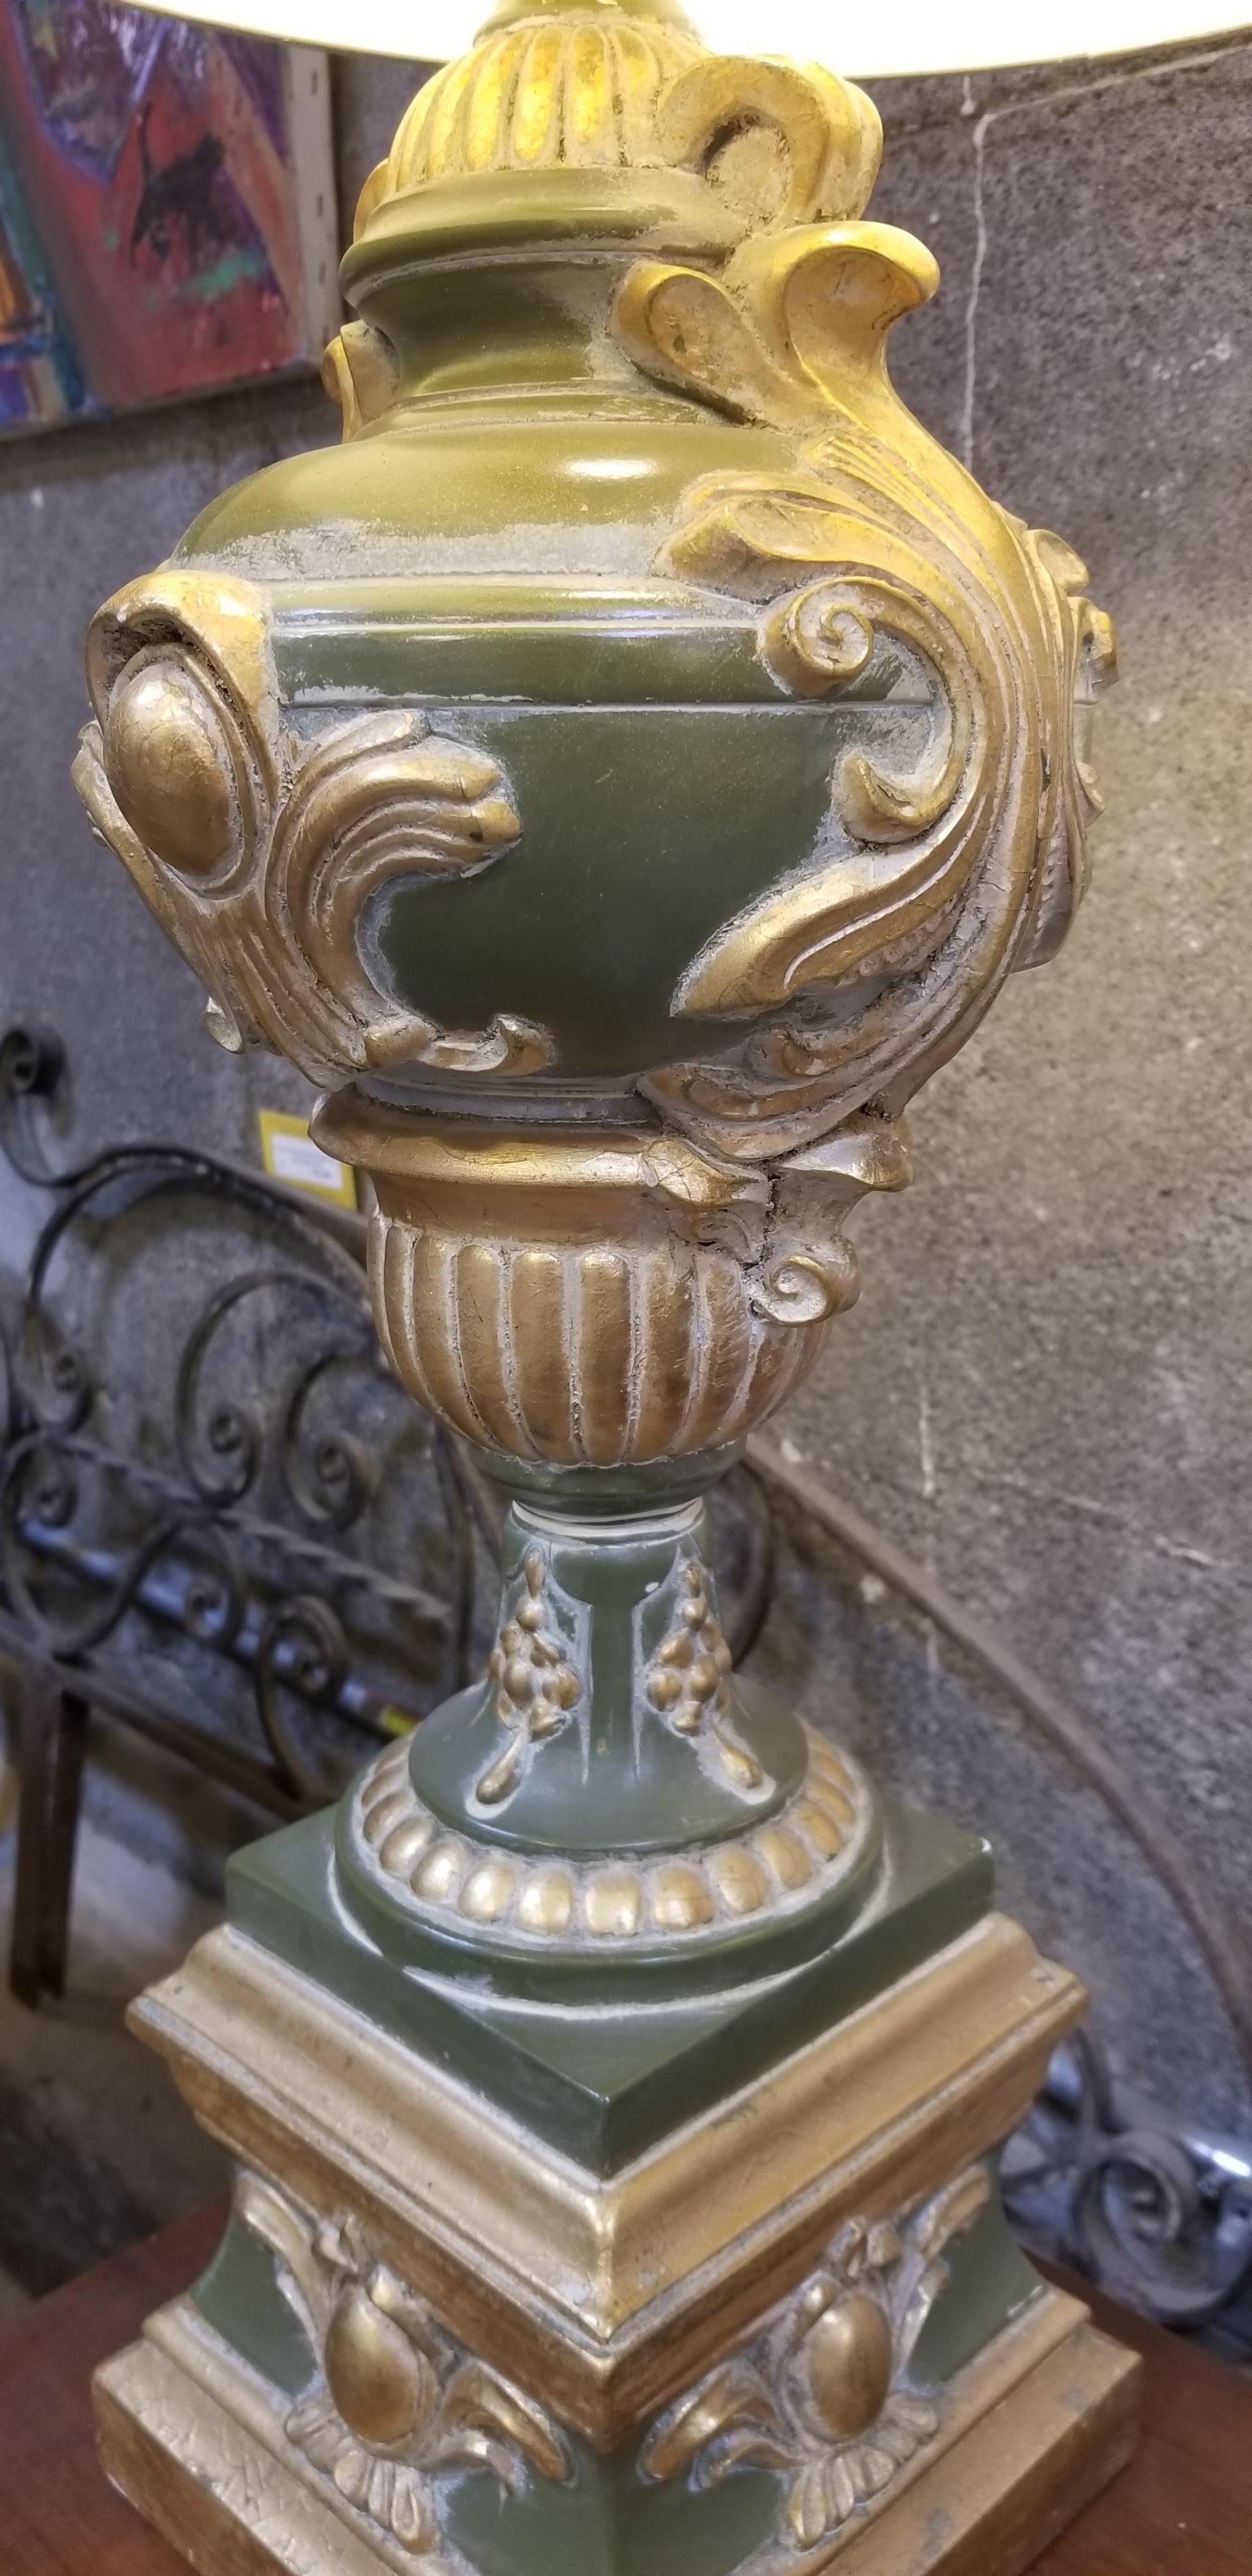 A cast and painted gold and green, glazed plaster table lamp by Light House Lamp & Shade Company, Los Angeles, California, circa. 1950s. Classic Hollywood Regency design, reminiscent of Serge Roche or James Mont. Excellent original condition with